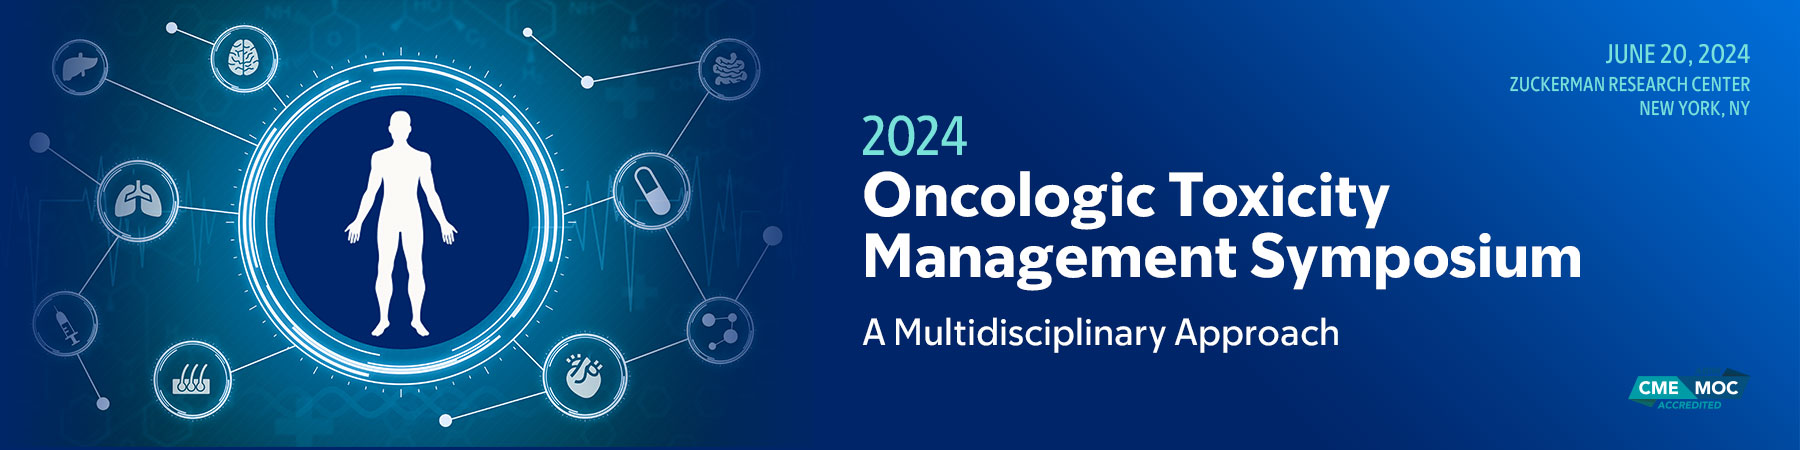 2024 Oncologic Toxicity Management Symposium: A Multidisciplinary Approach Banner